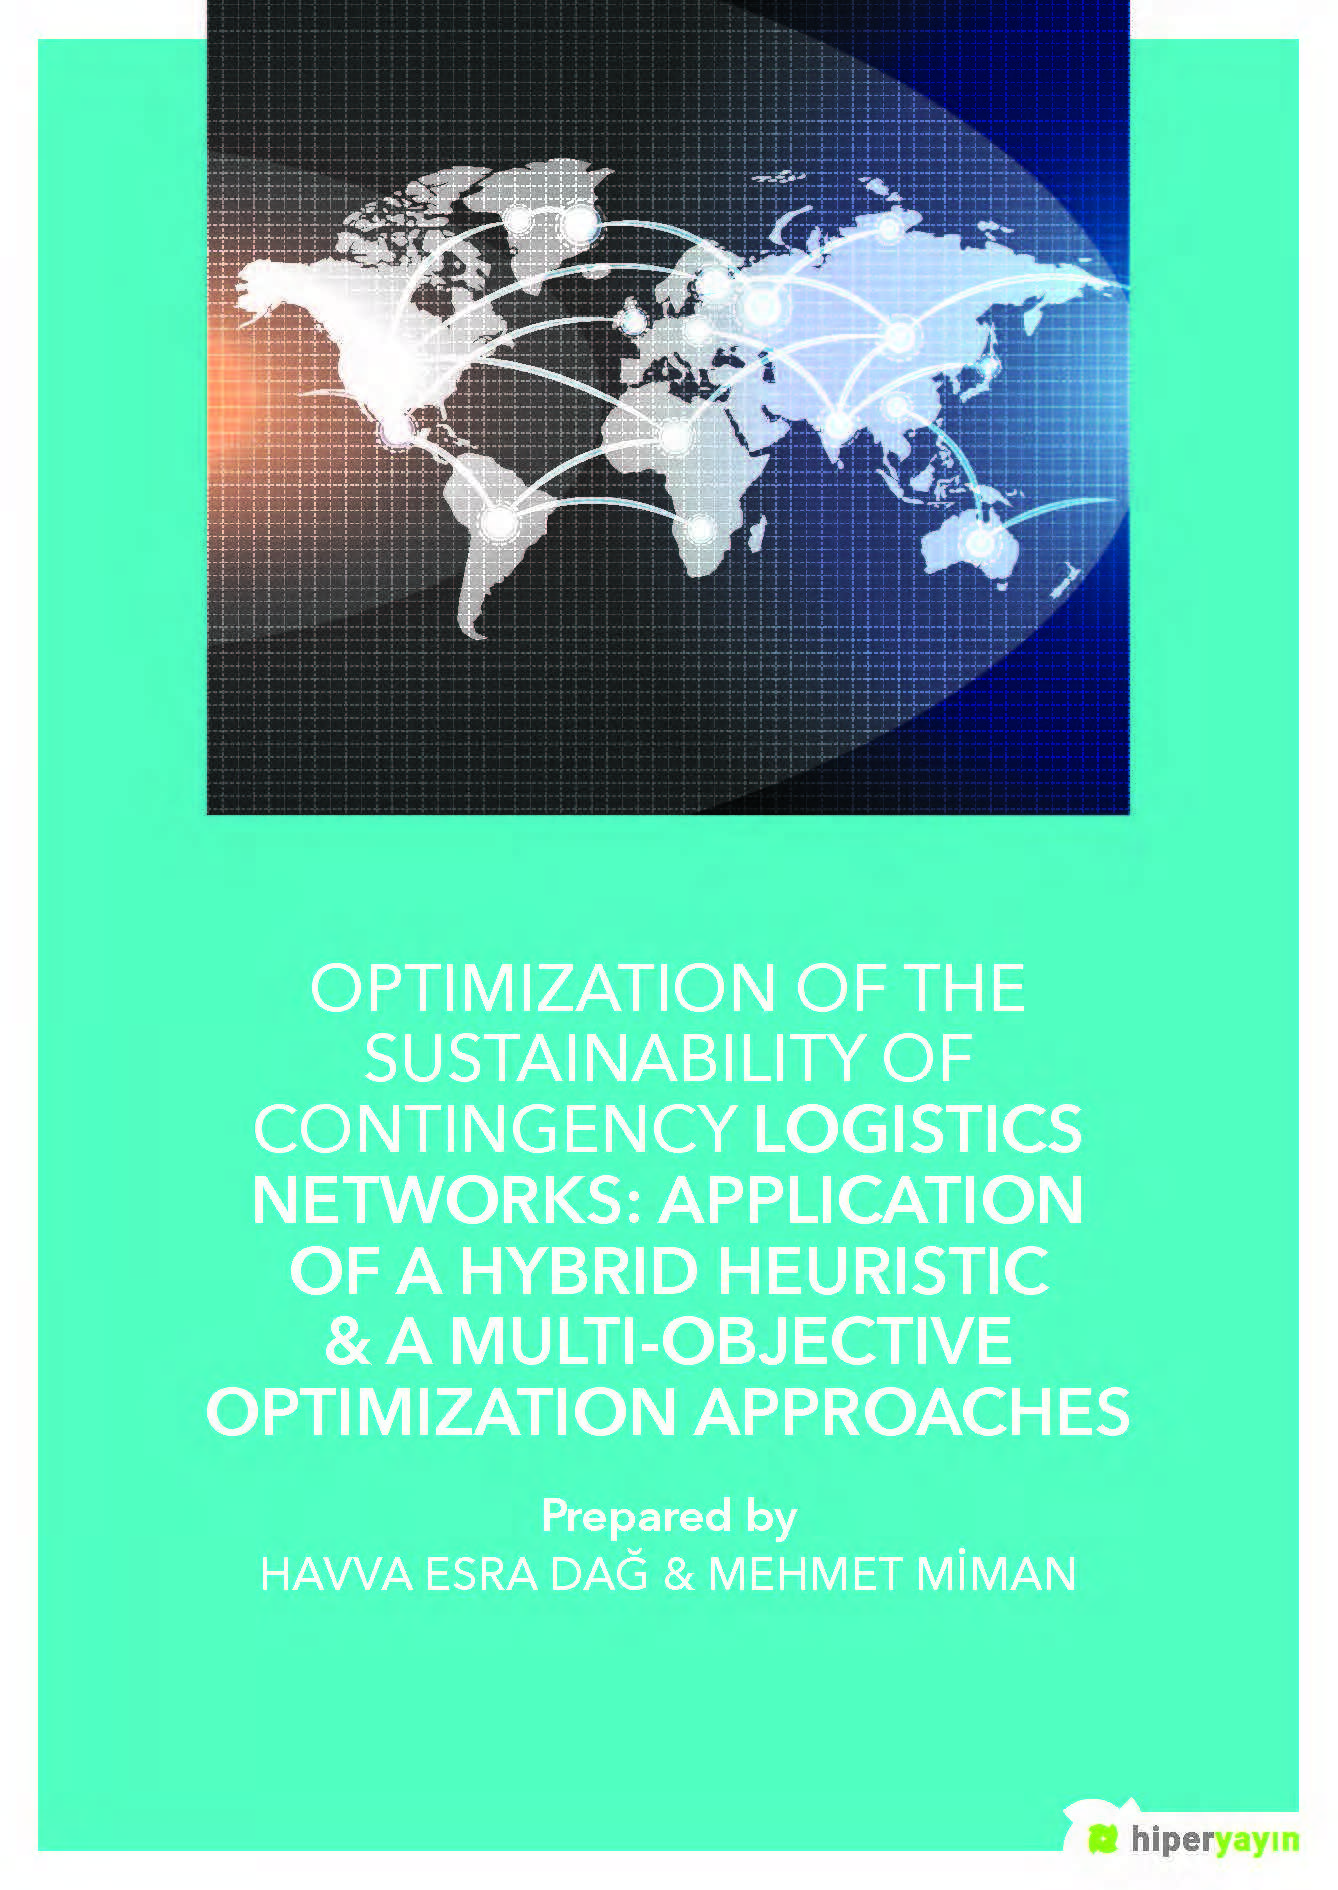 Optimization of The Sustainability of Contingency Logistics Networks: Application of a Hybrid Heuristic & A Multi-Objective Optimization Approaches